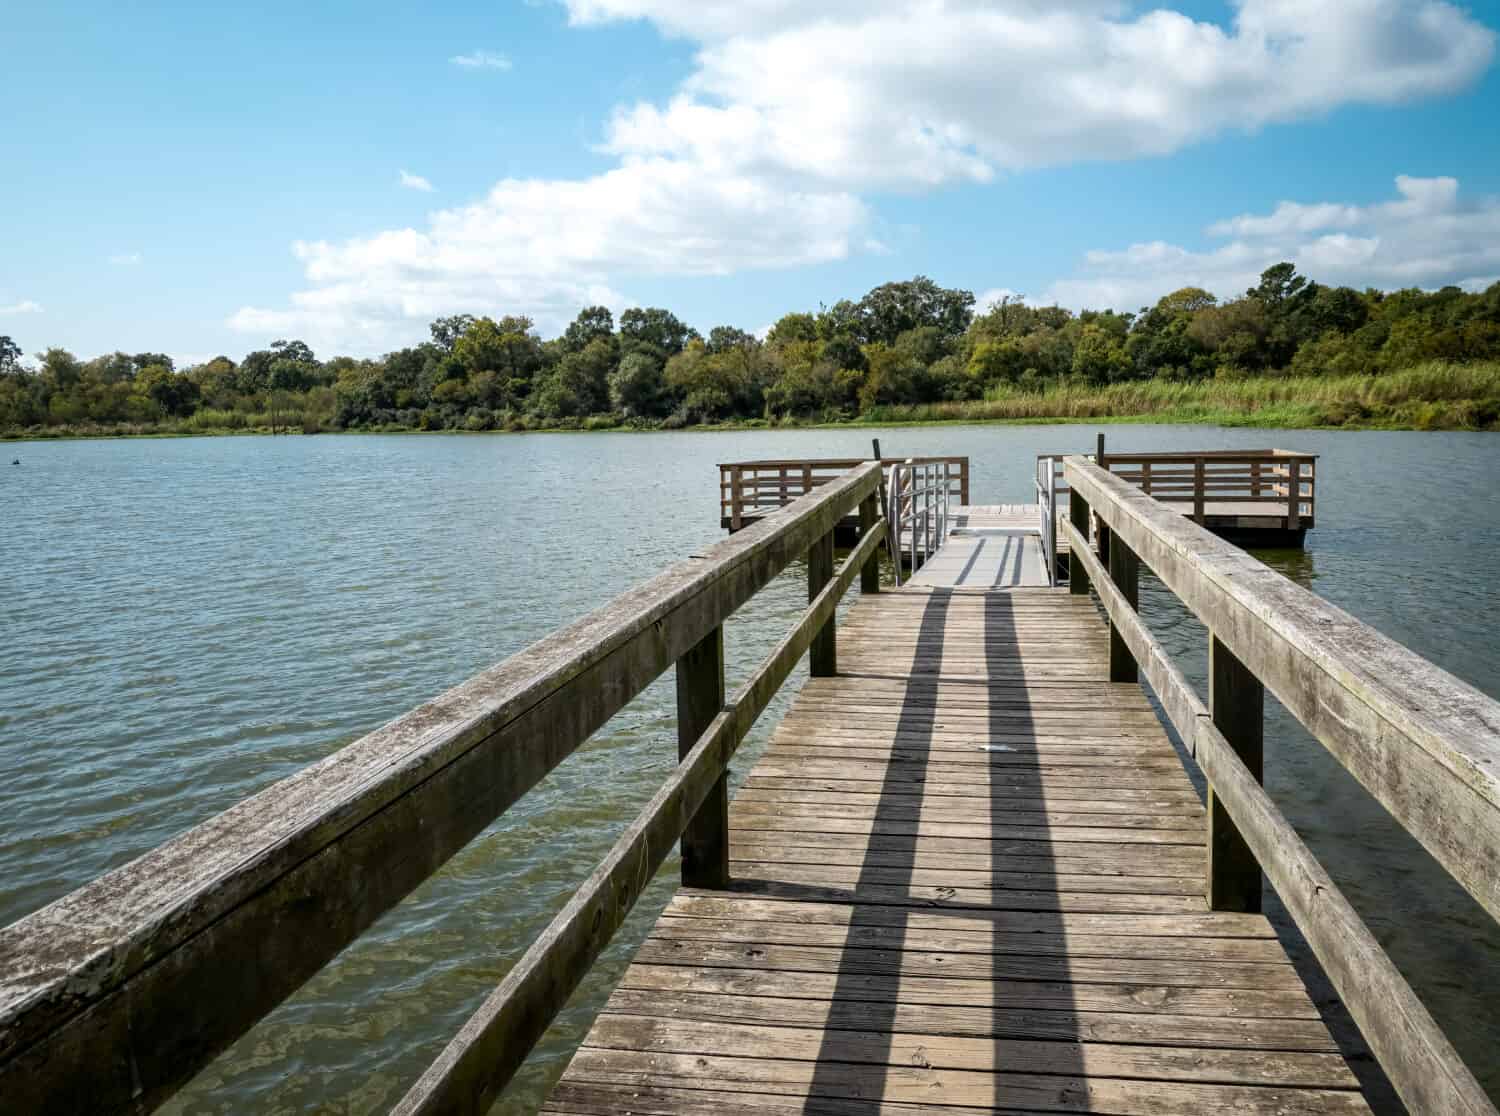 View of Bay Area Park pier and dock on Armand Bayou in Pasadena Texas.